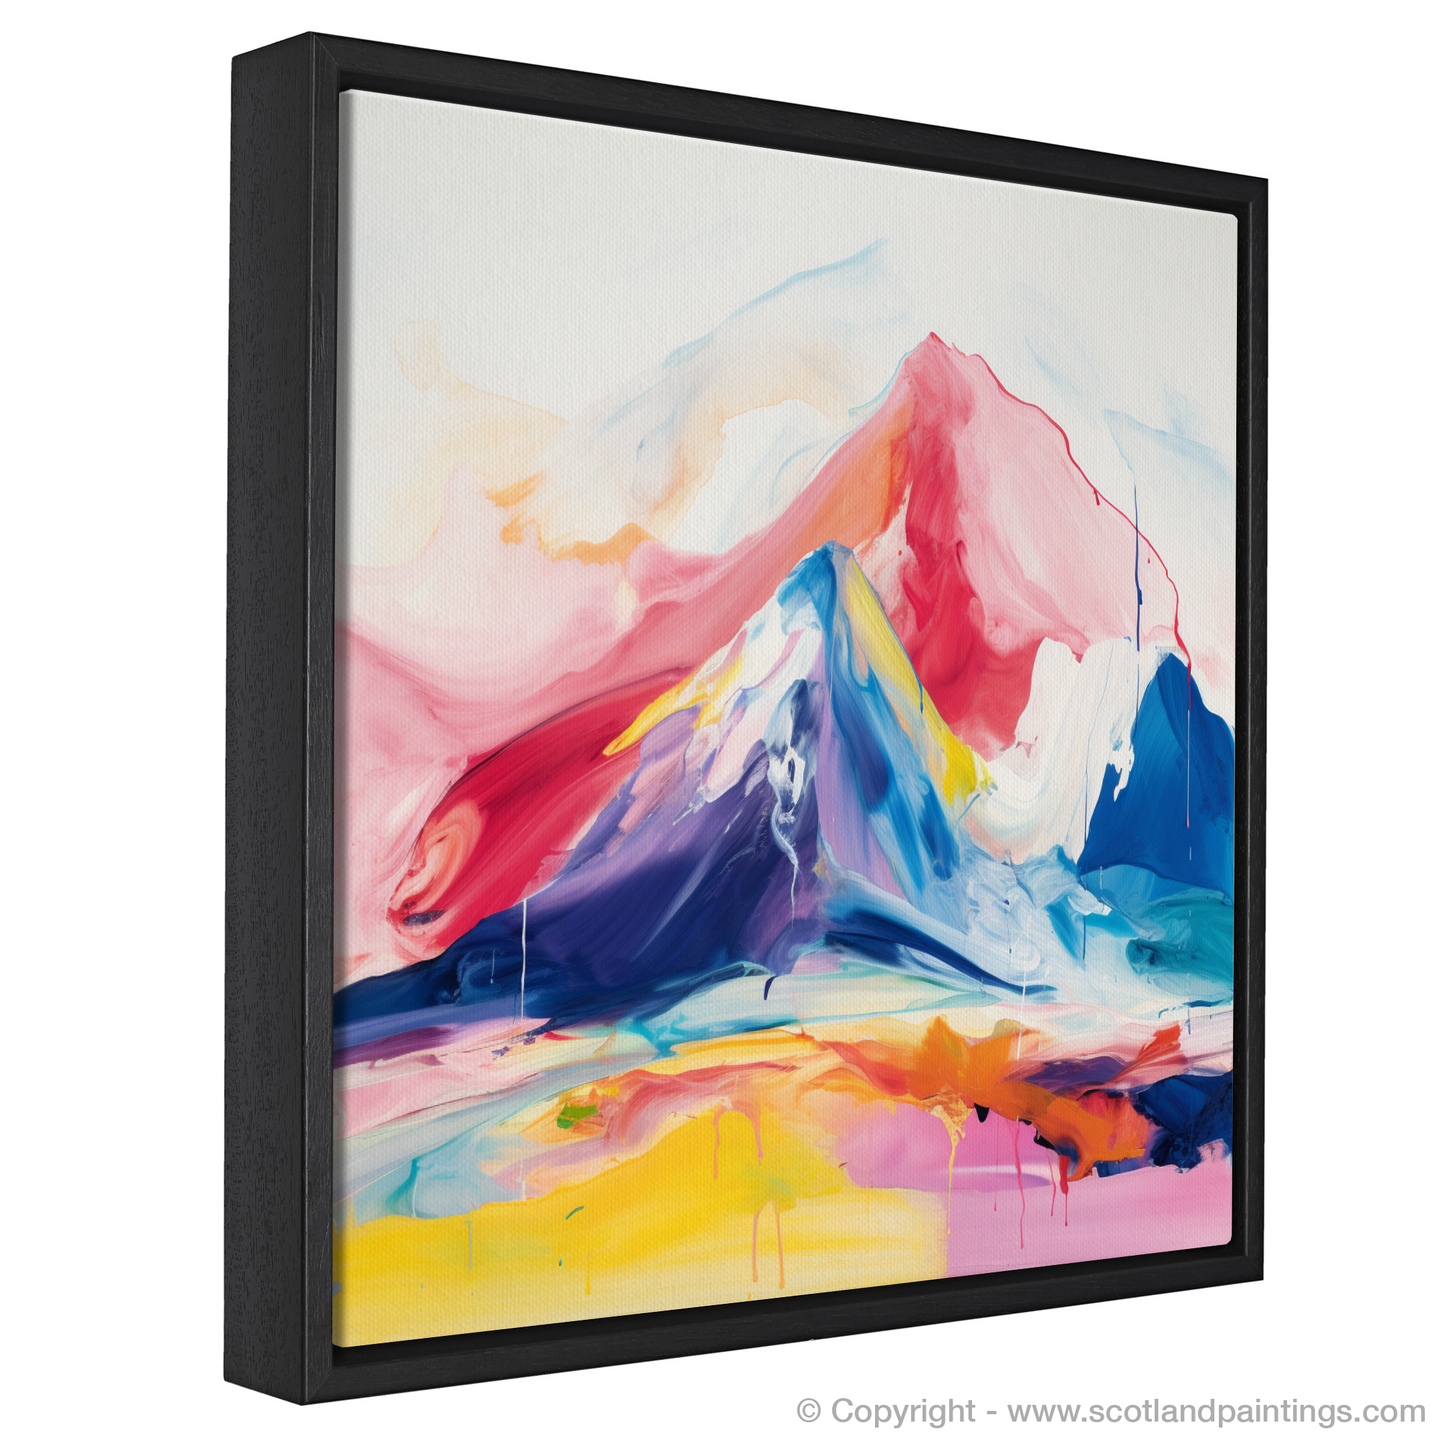 Painting and Art Print of Ben More entitled "Abstract Essence of Ben More".